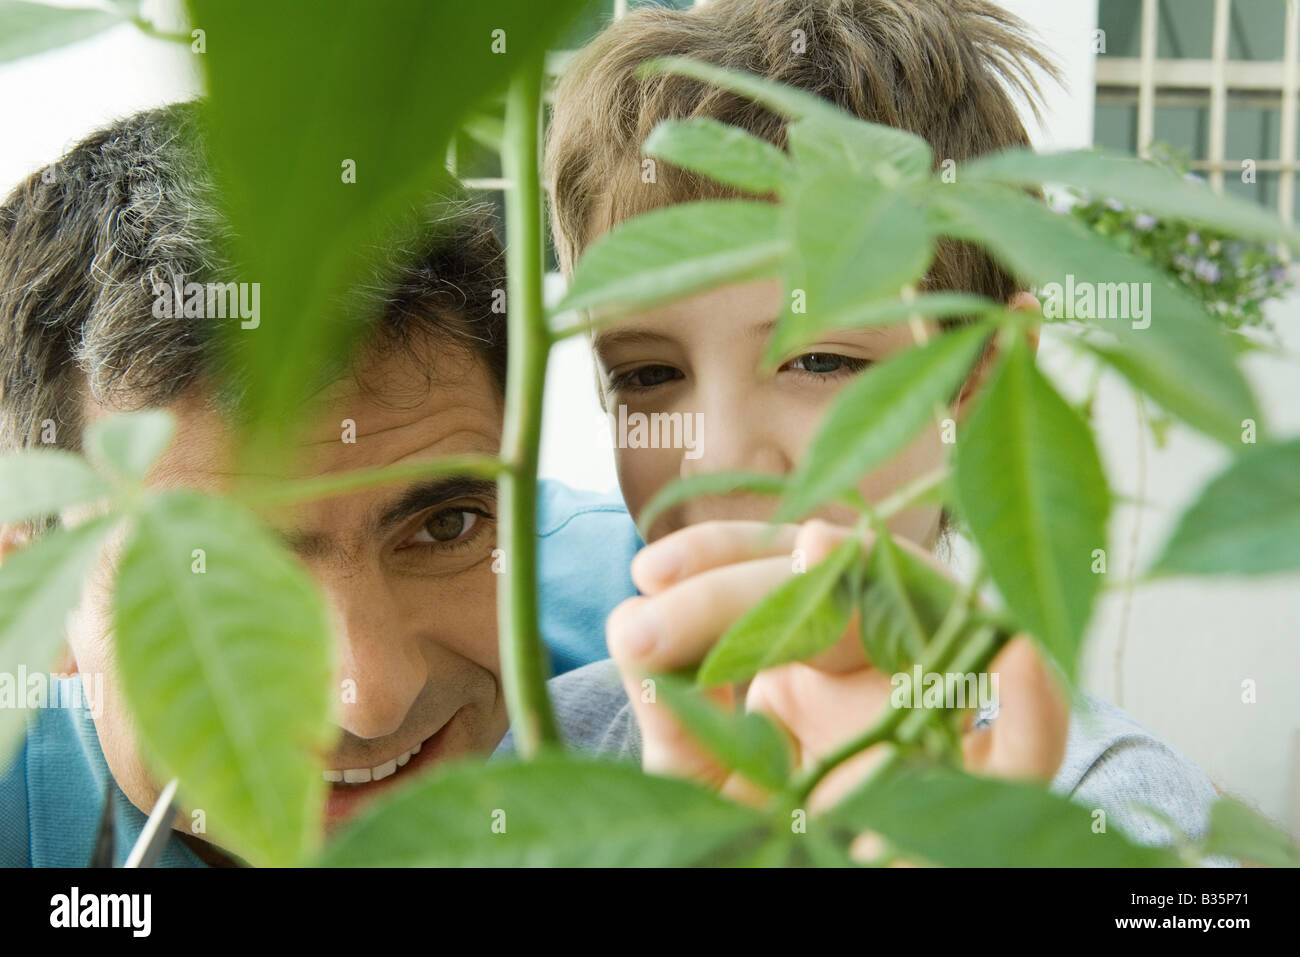 Father and son pruning plant together, smiling Stock Photo